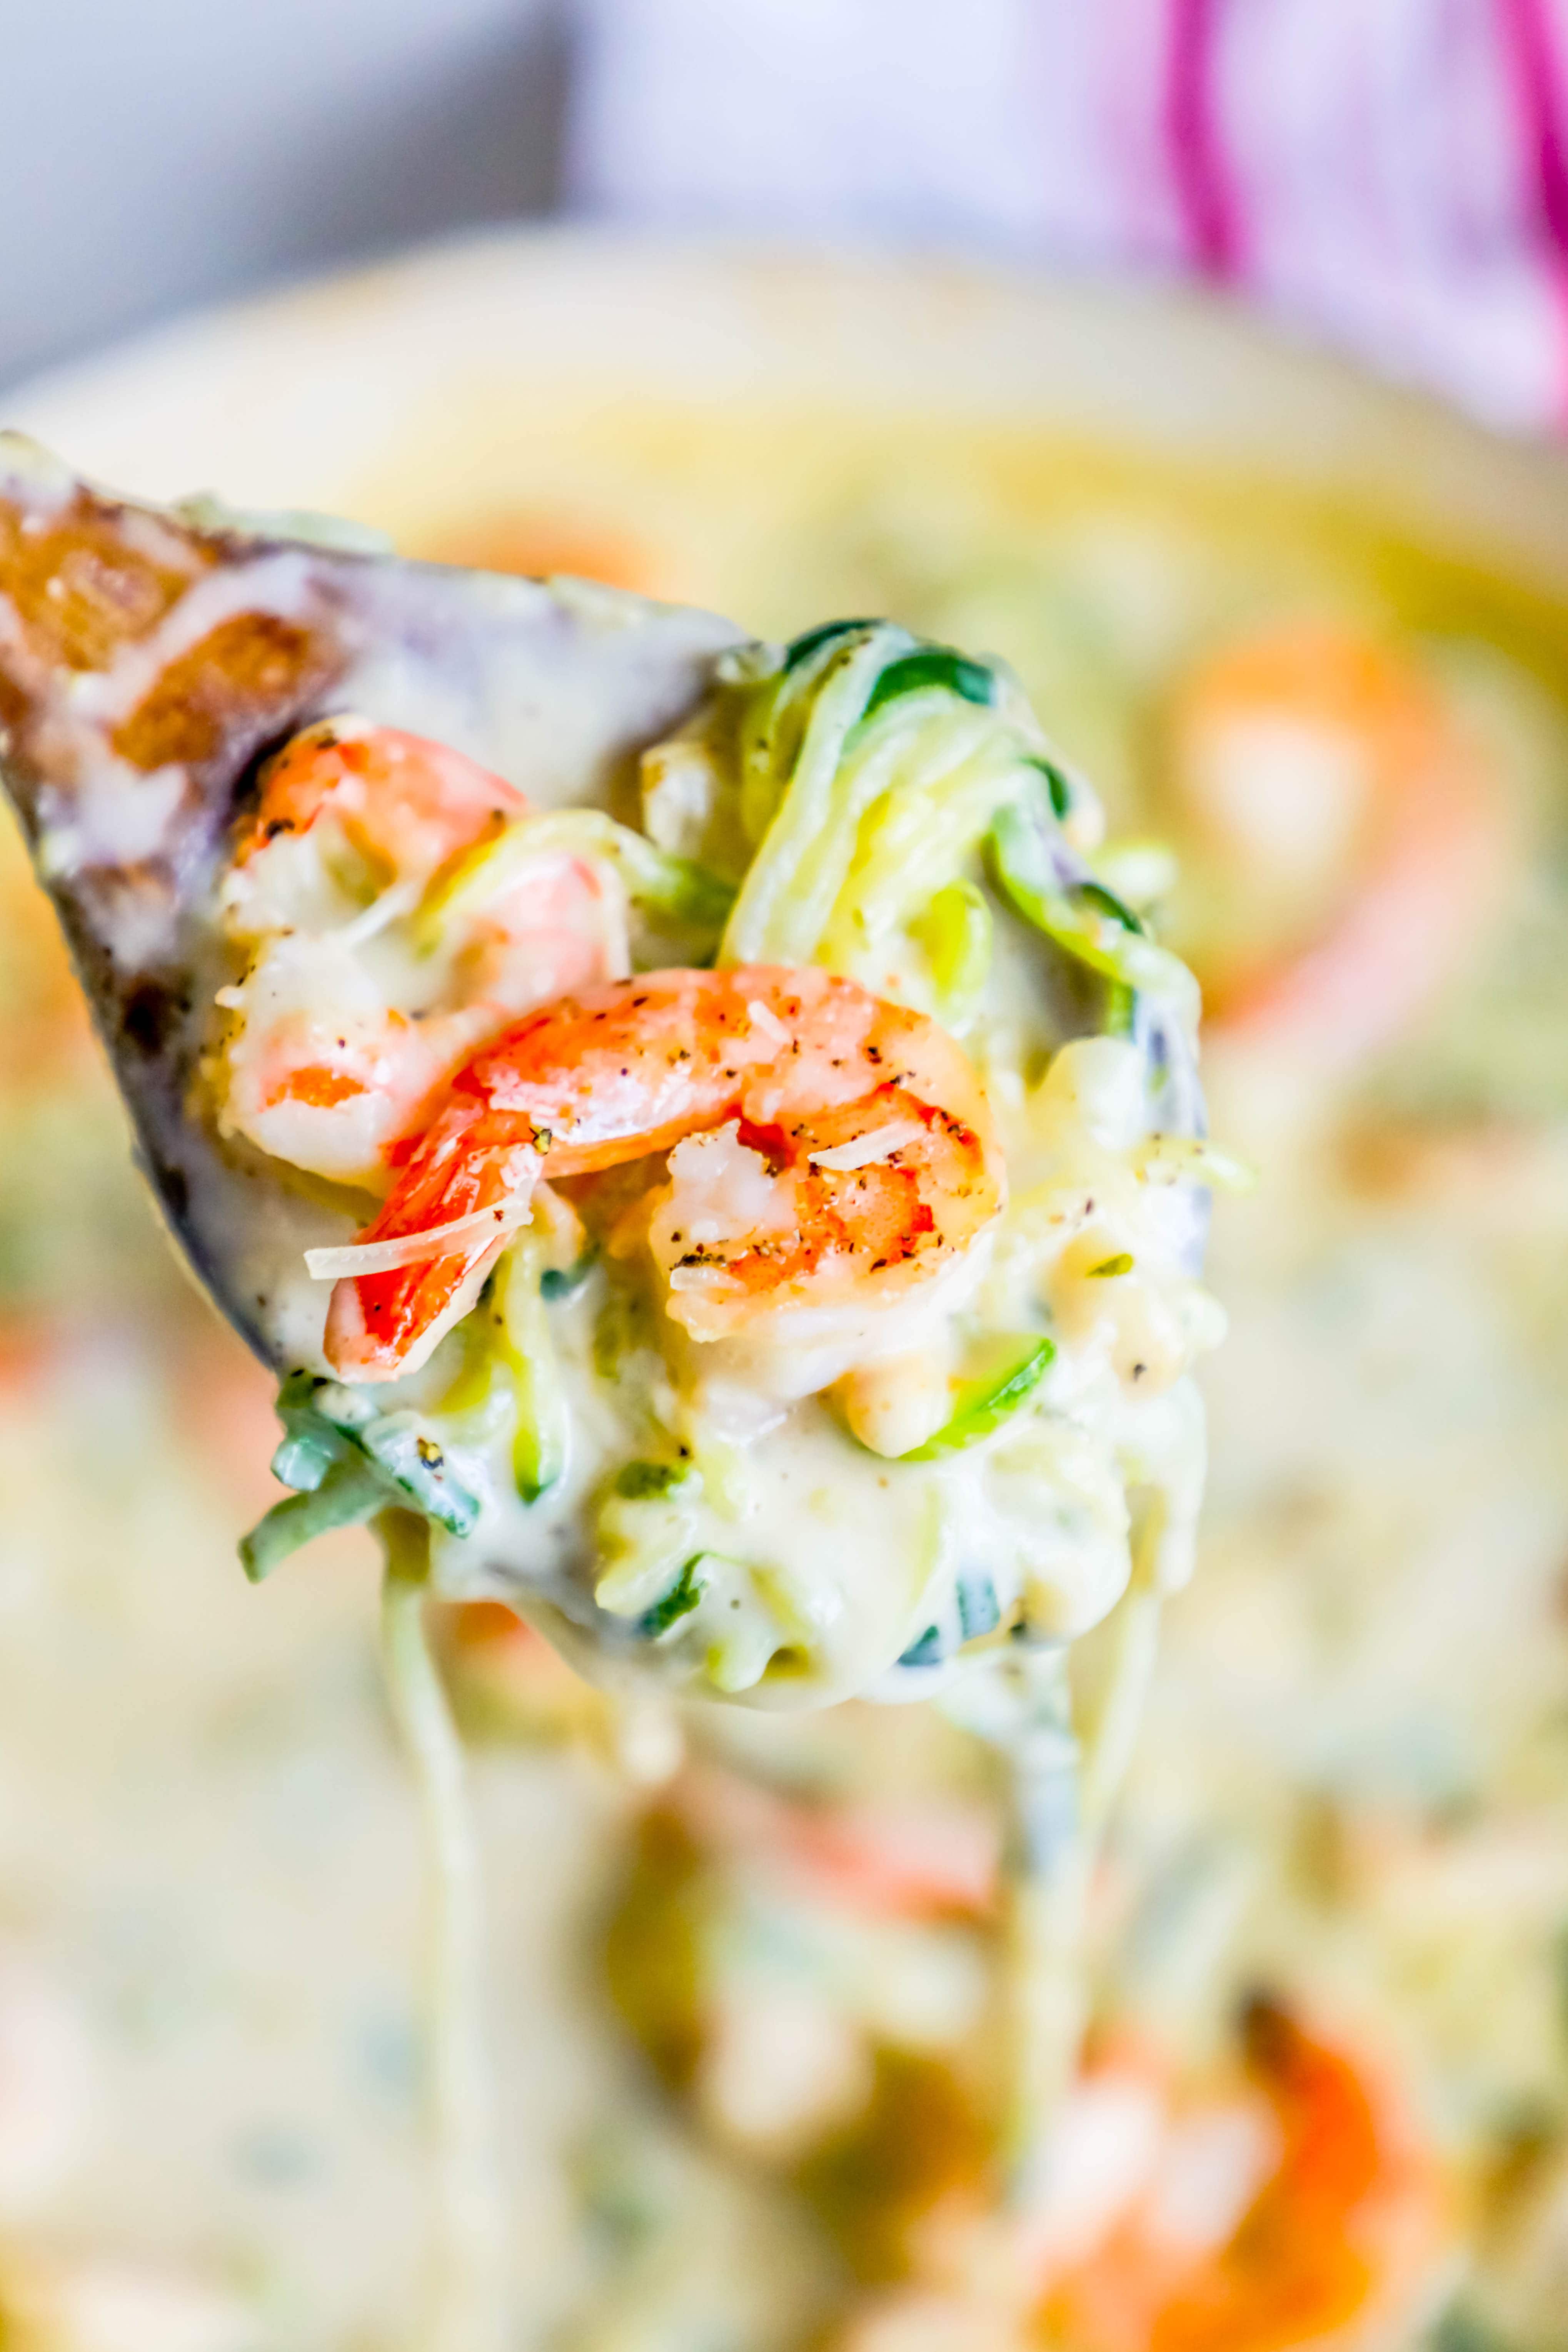 shrimp in a creamy sauce with noodles made out of zucchini on a spoon